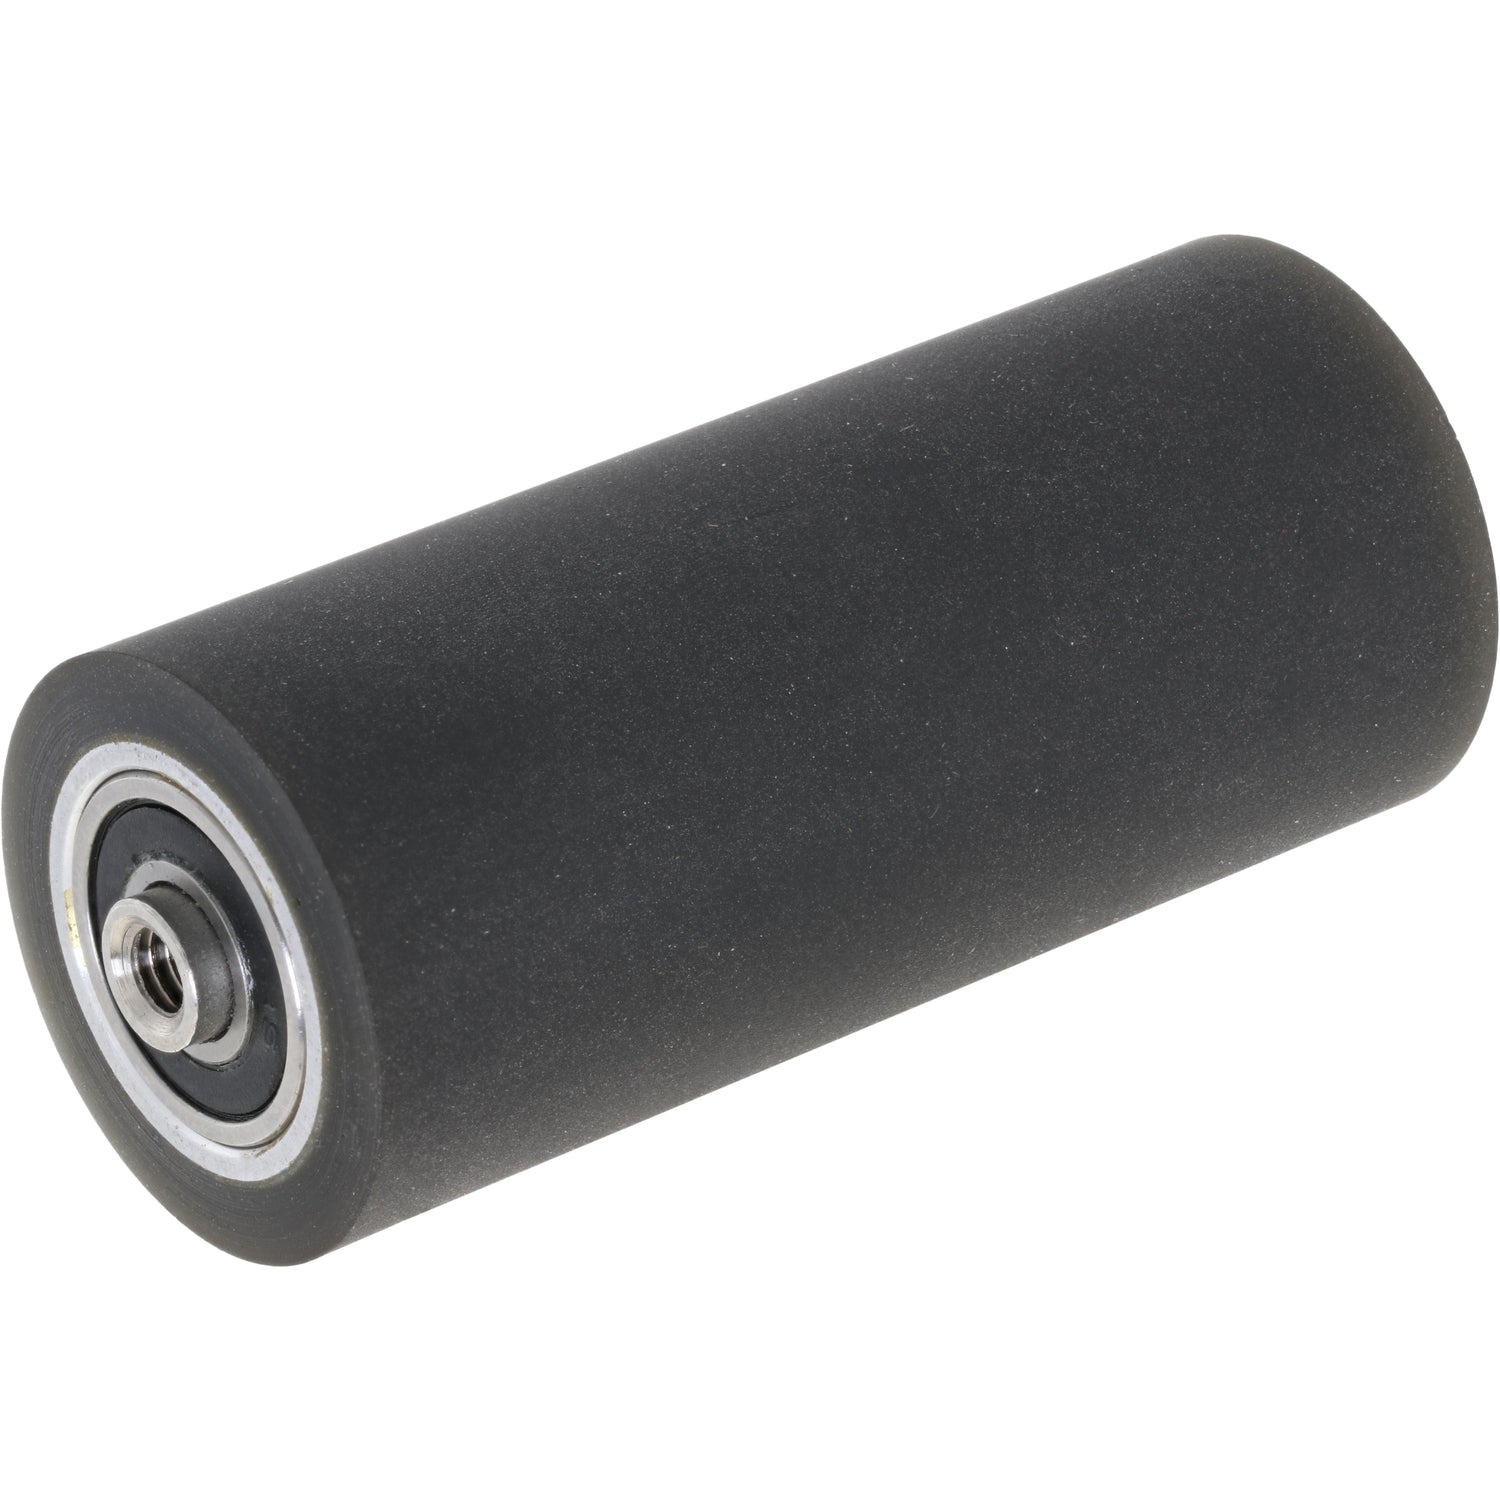 Black rubber roller, stainless steel center shaft and bearing on its side on a white background. 